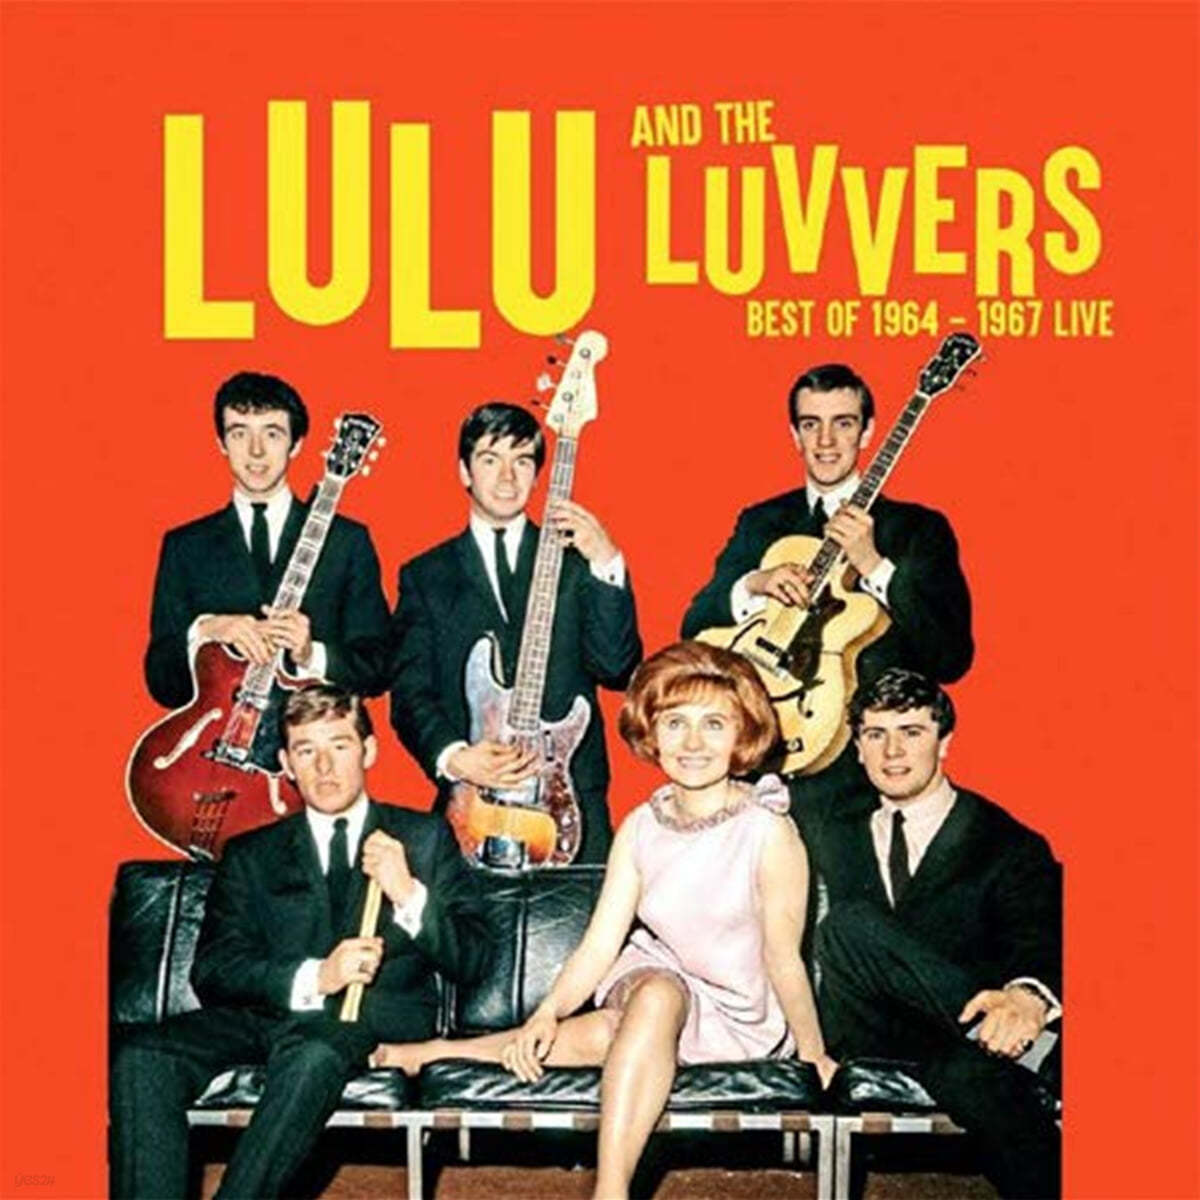 Lulu and The Luvvers (루루 앤 더 러버스) - Best Of 1964 - 1967 Live [LP] 